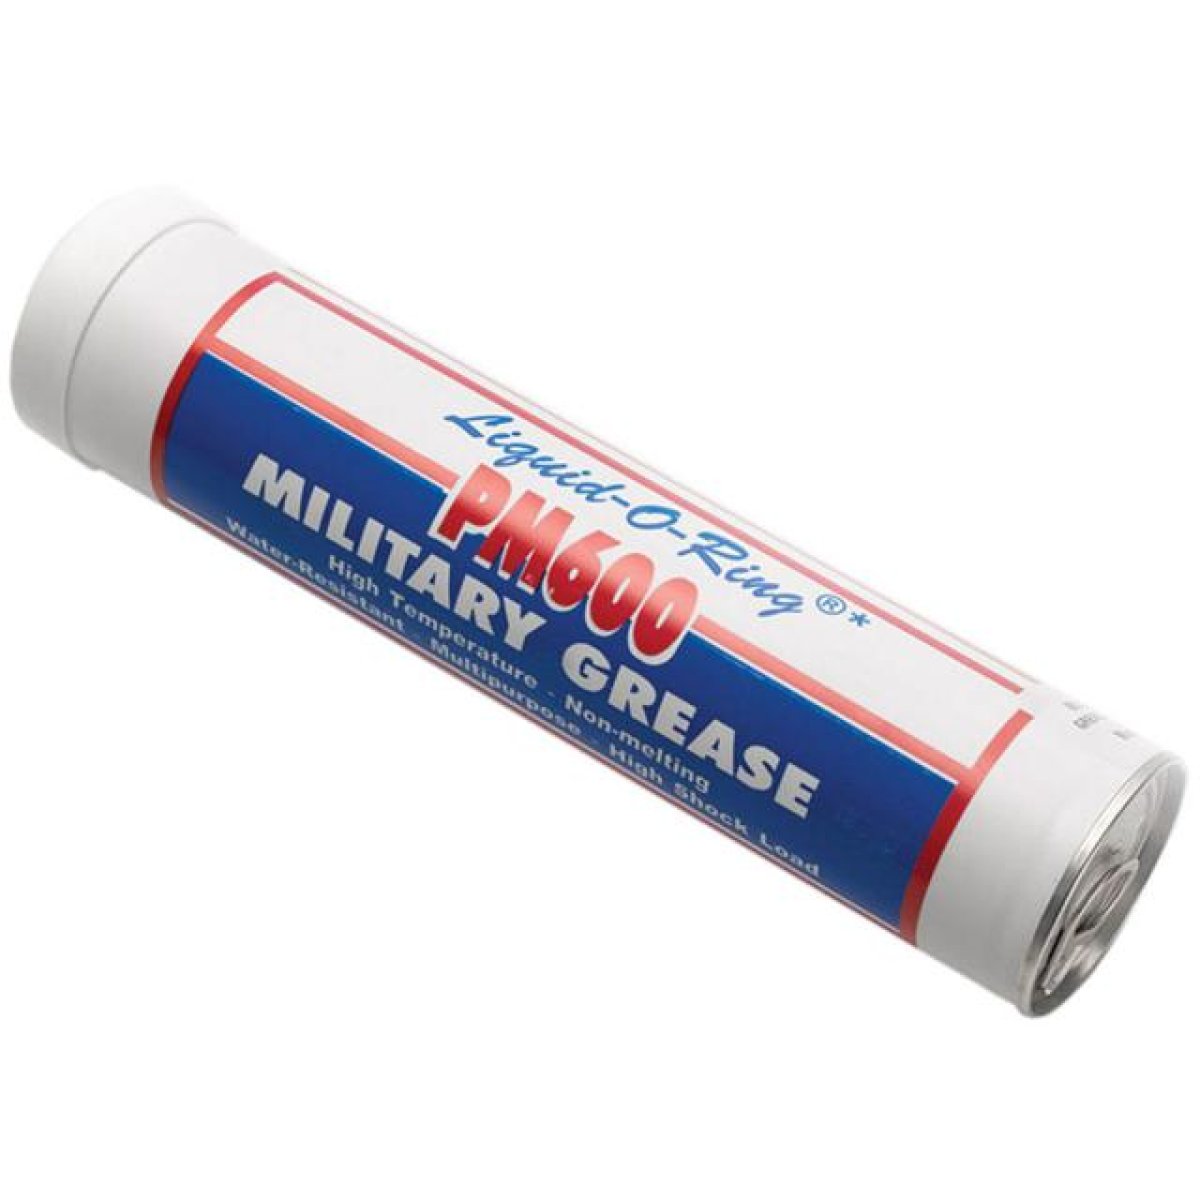 Смазка Sram PM600 Military Grease 14oz (for oring seals) 00.4315.014.010